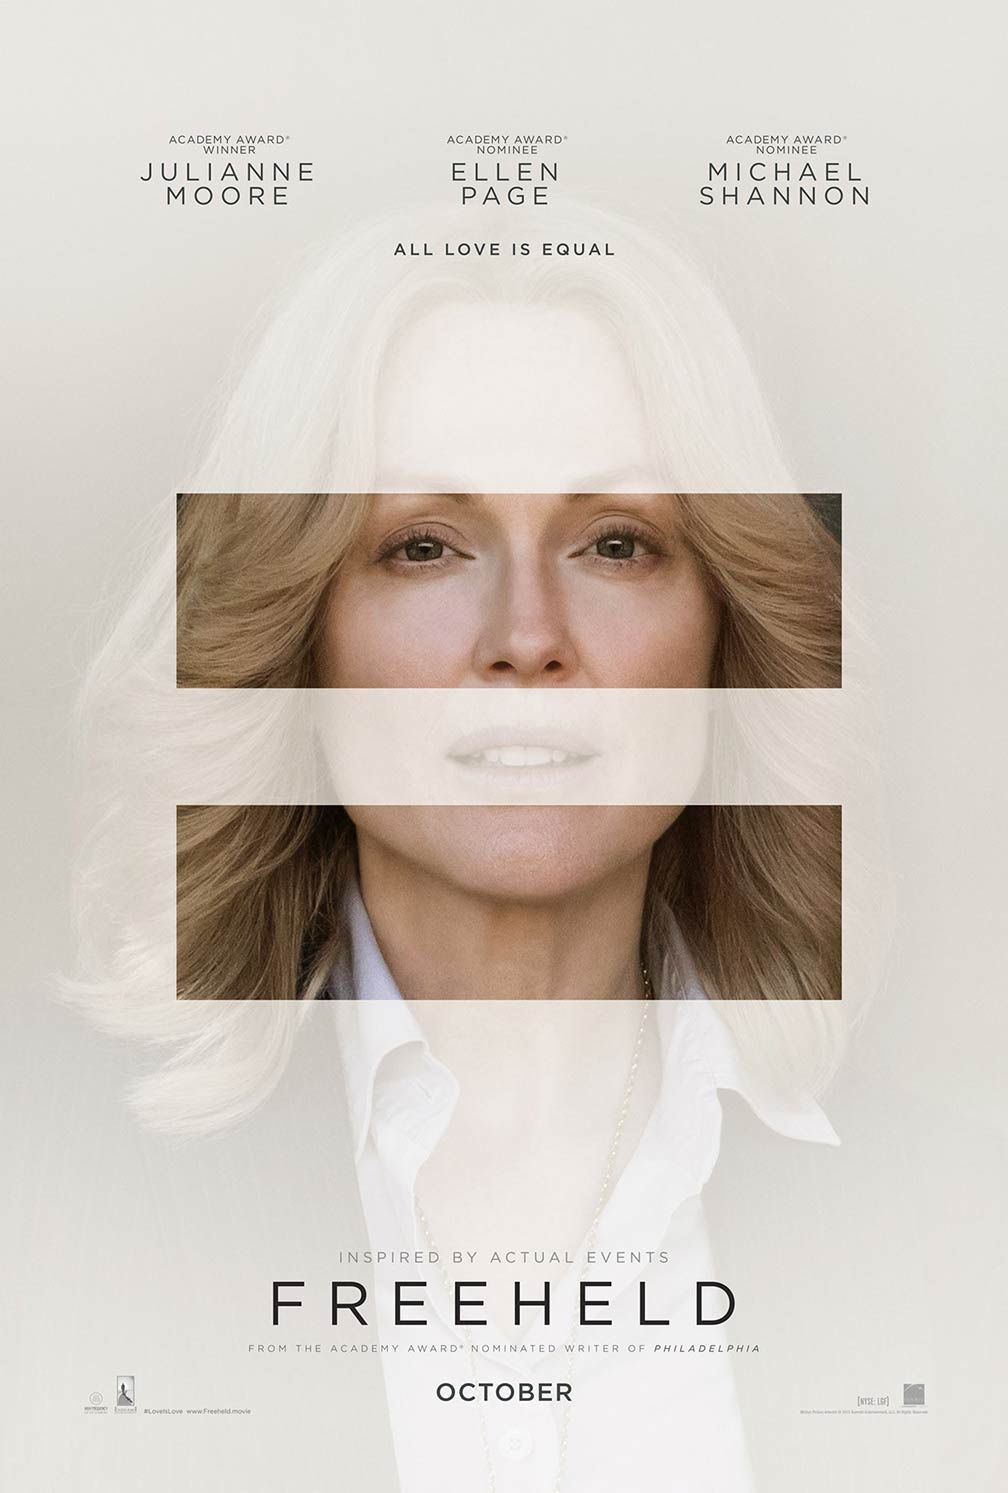 ICYMI: Trailer for Equal-Rights Drama ‘Freeheld’ Premieres This Week